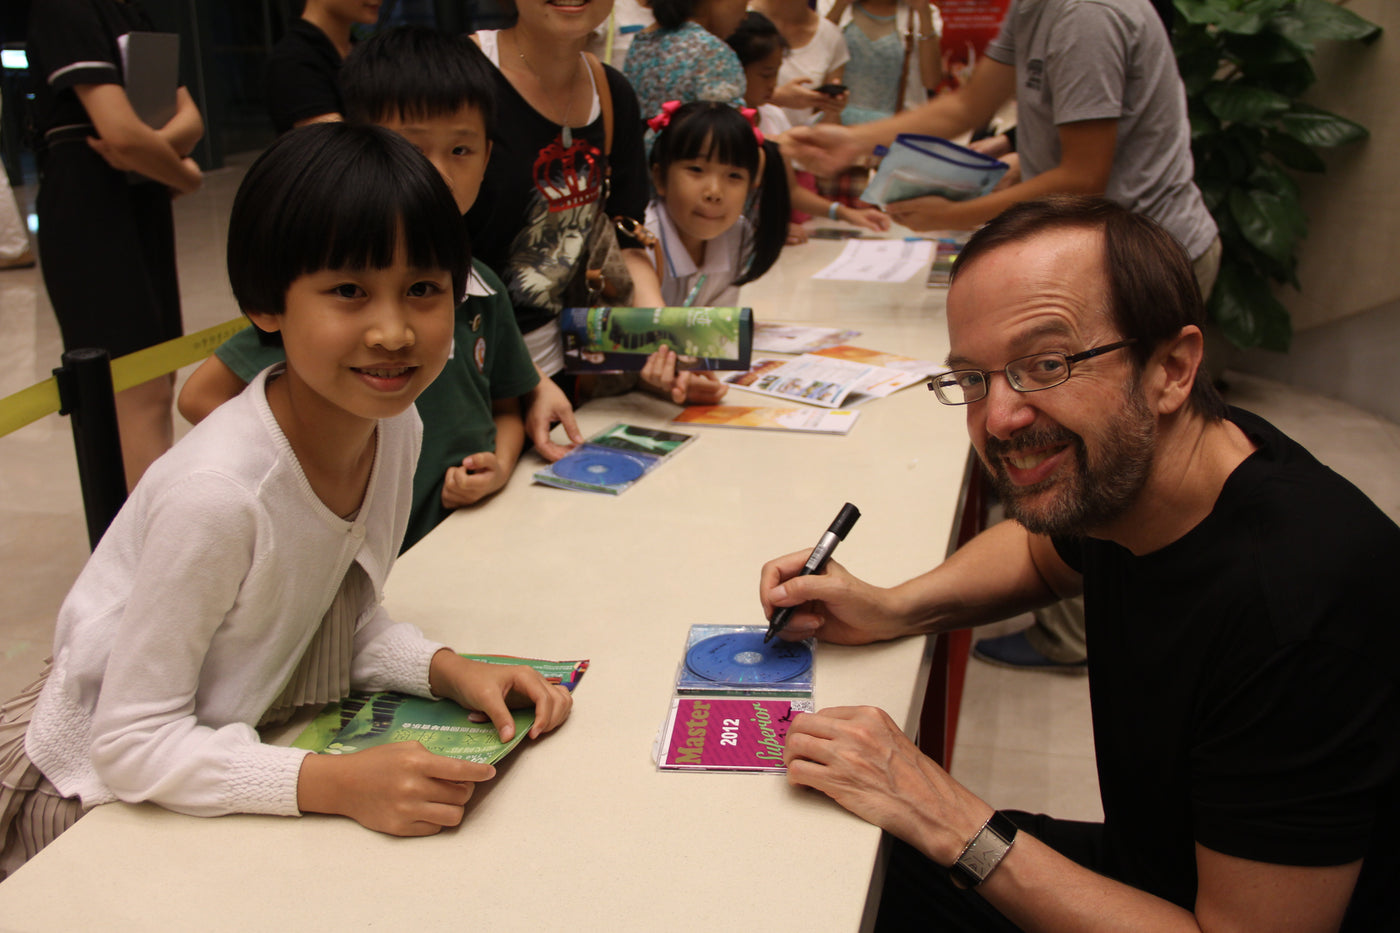 pianist Kevin Kern autographs a CD for a young girl with short dark hair wearing a white sweater while other young fans look on.